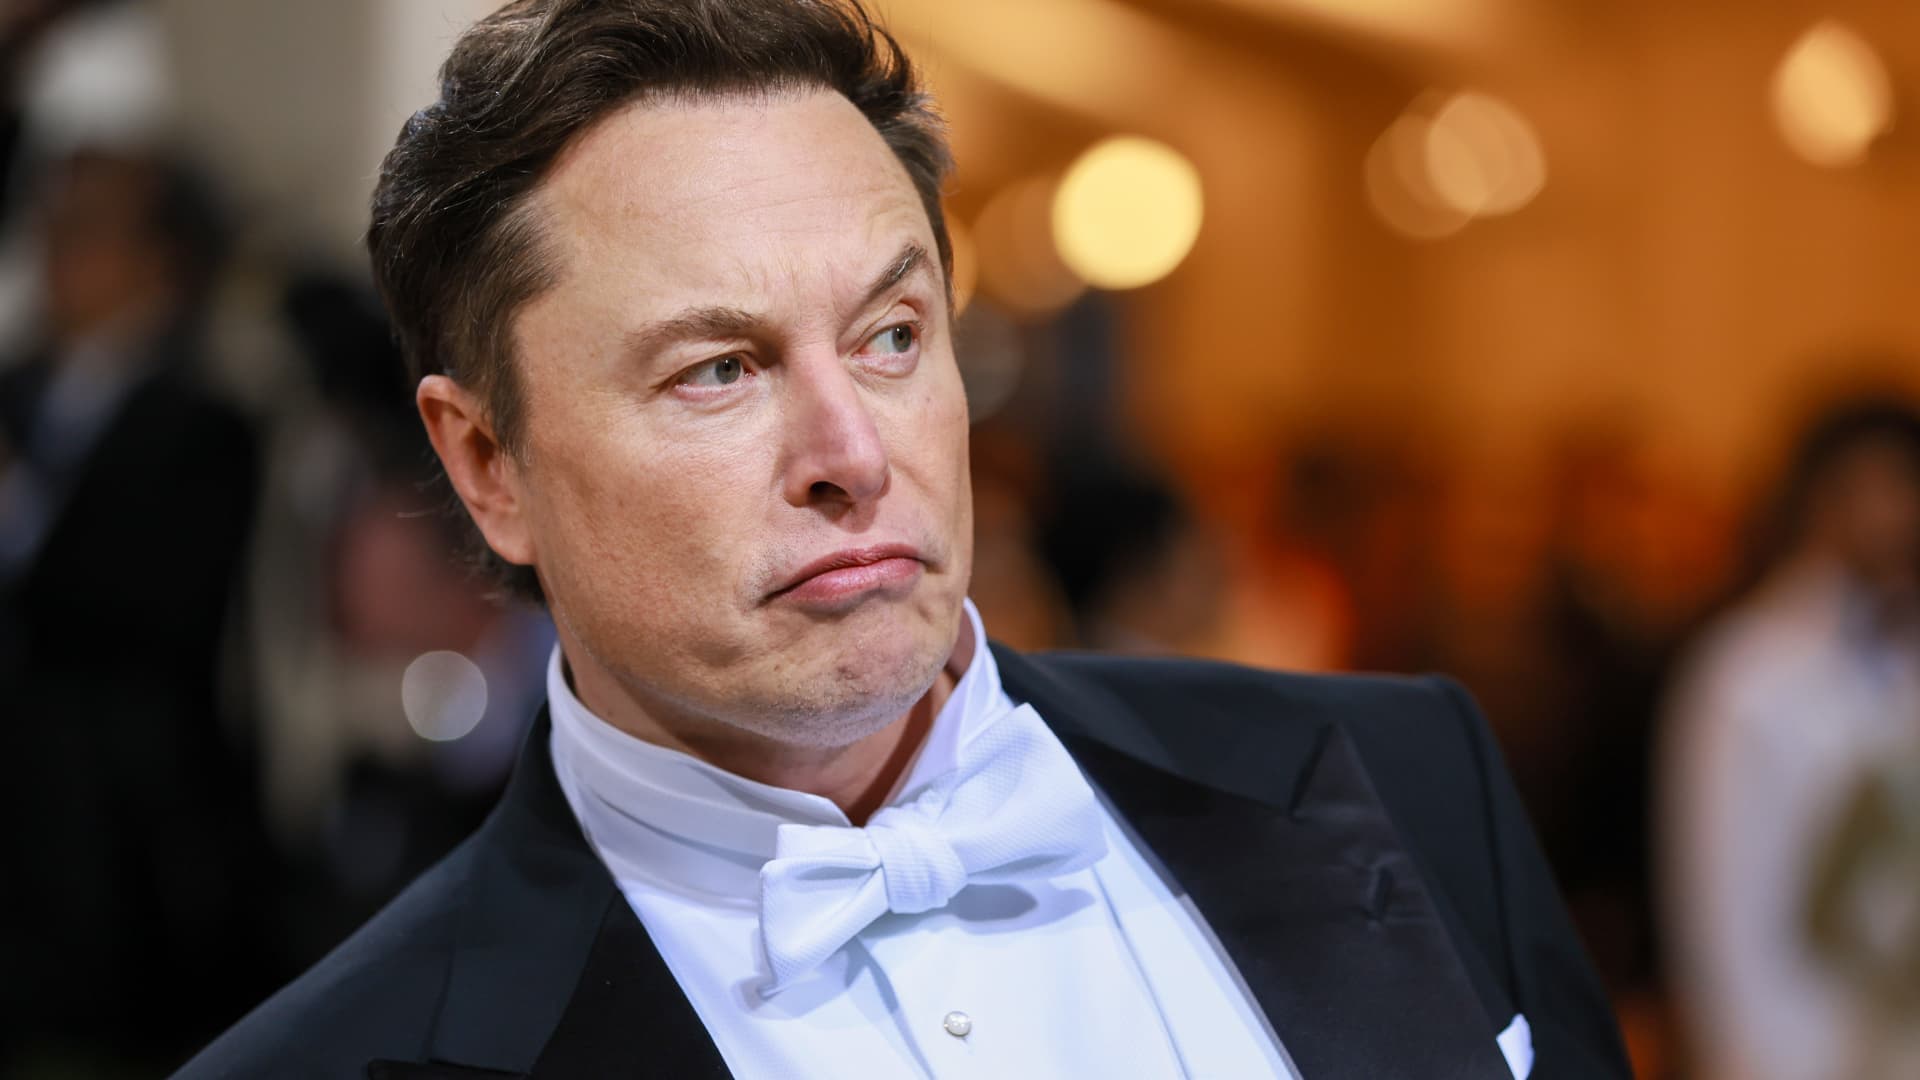 Elon Musk had a rough week across his empire — Tesla, Twitter and SpaceX